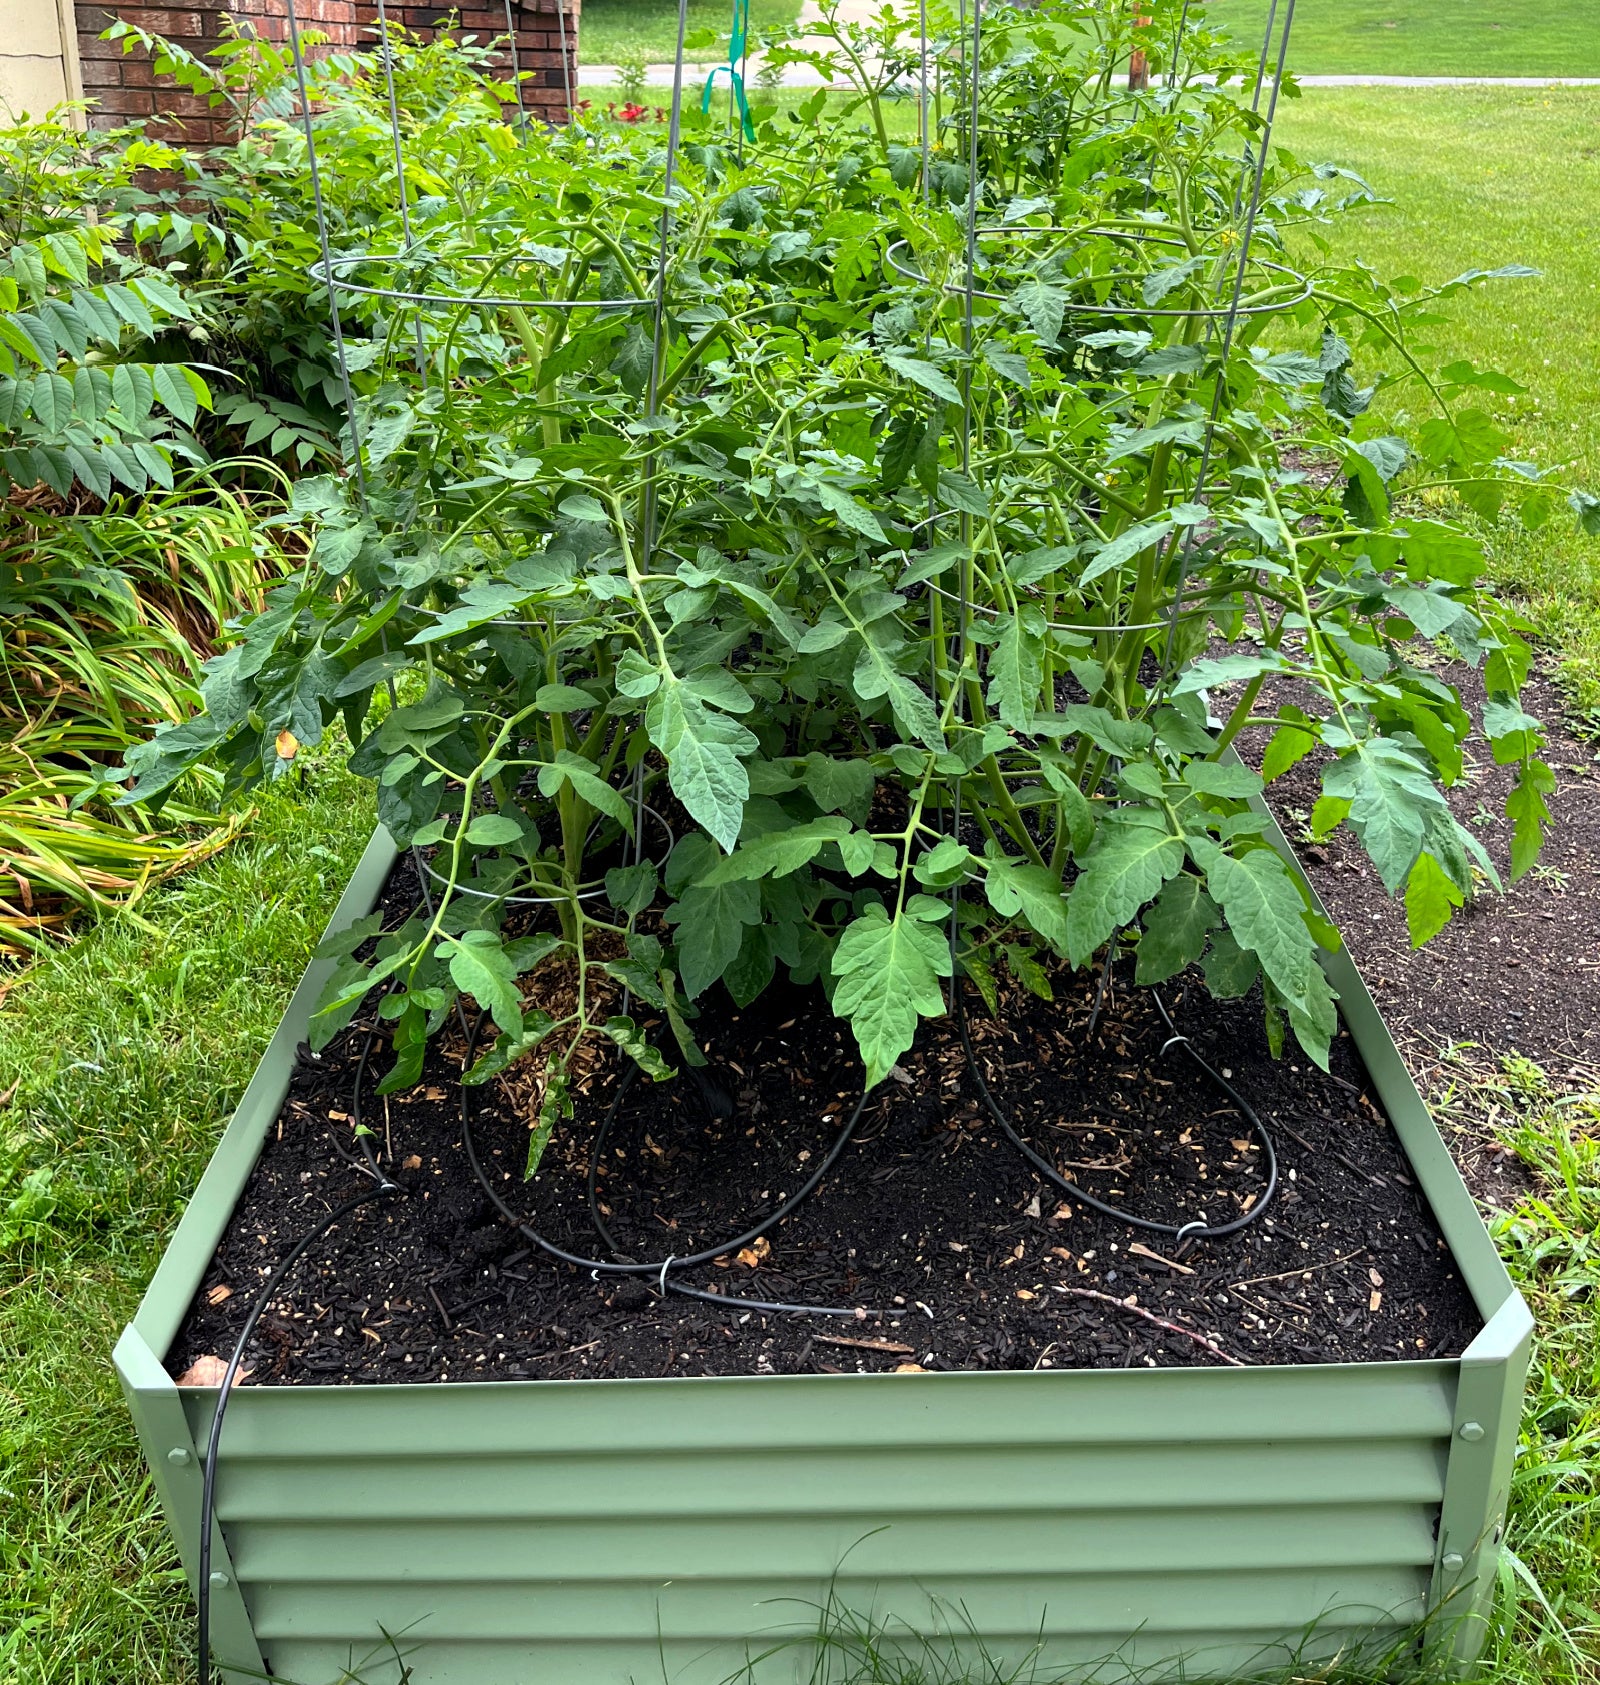 sage medio raised garden bed with tomatoes